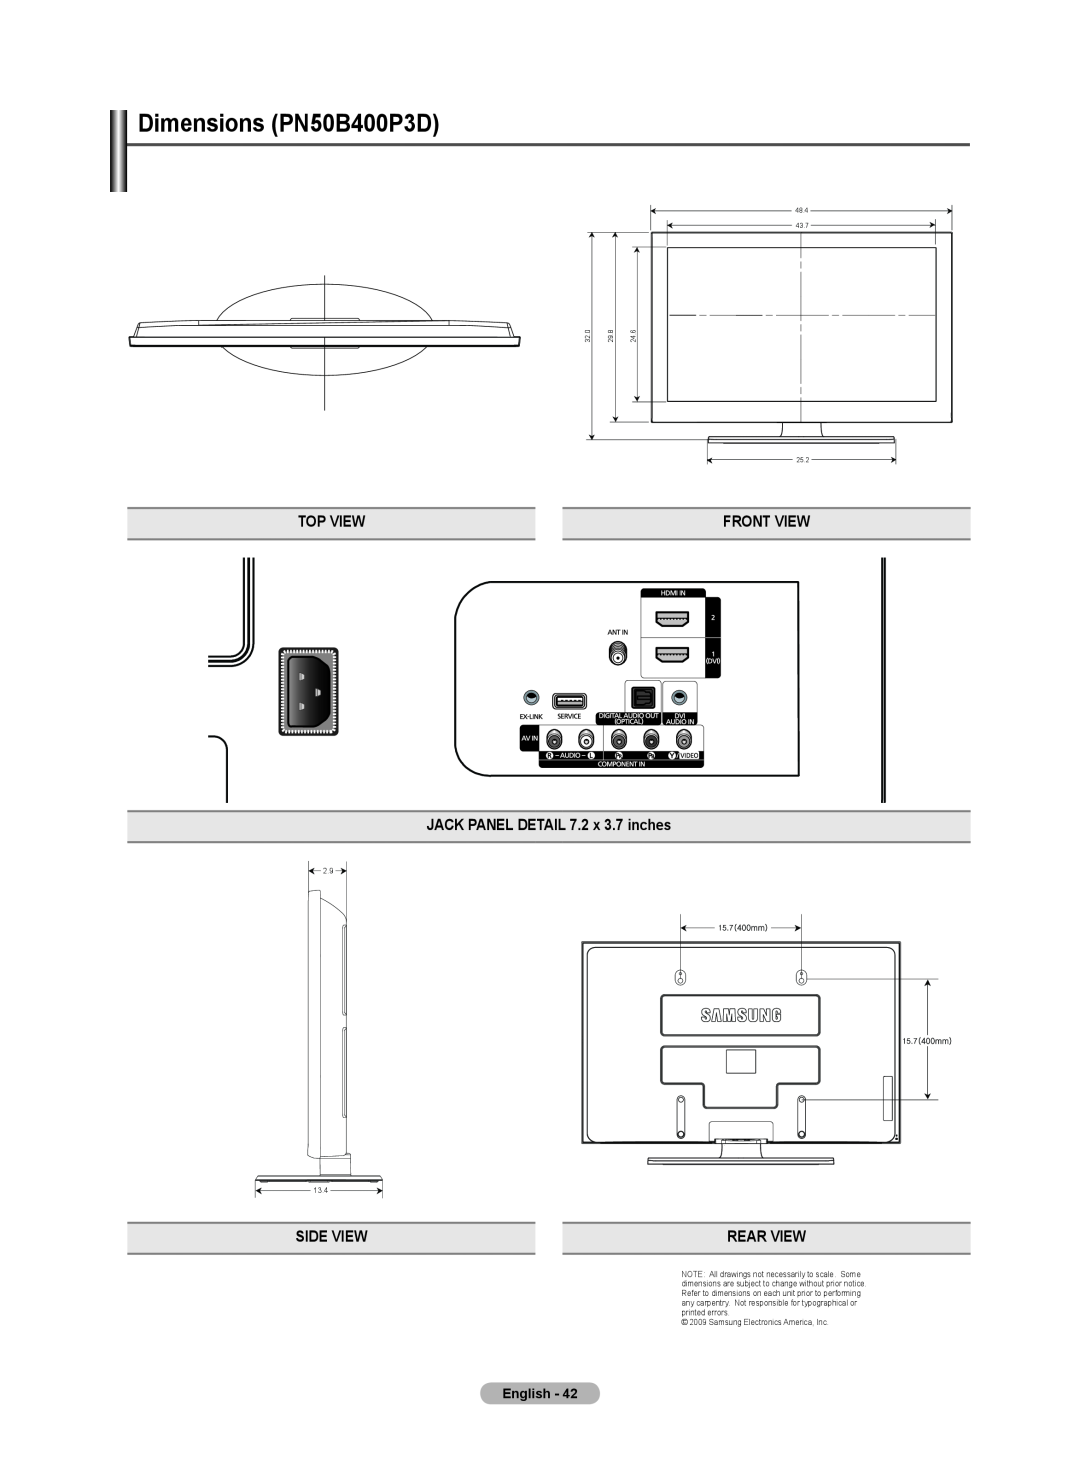 Samsung BN68-02426A-00 Top View, JACK PANEL DETAIL 7.2 x 3.7 inches, Side View, Rear View, Front View, English, 48.4, 43.7 